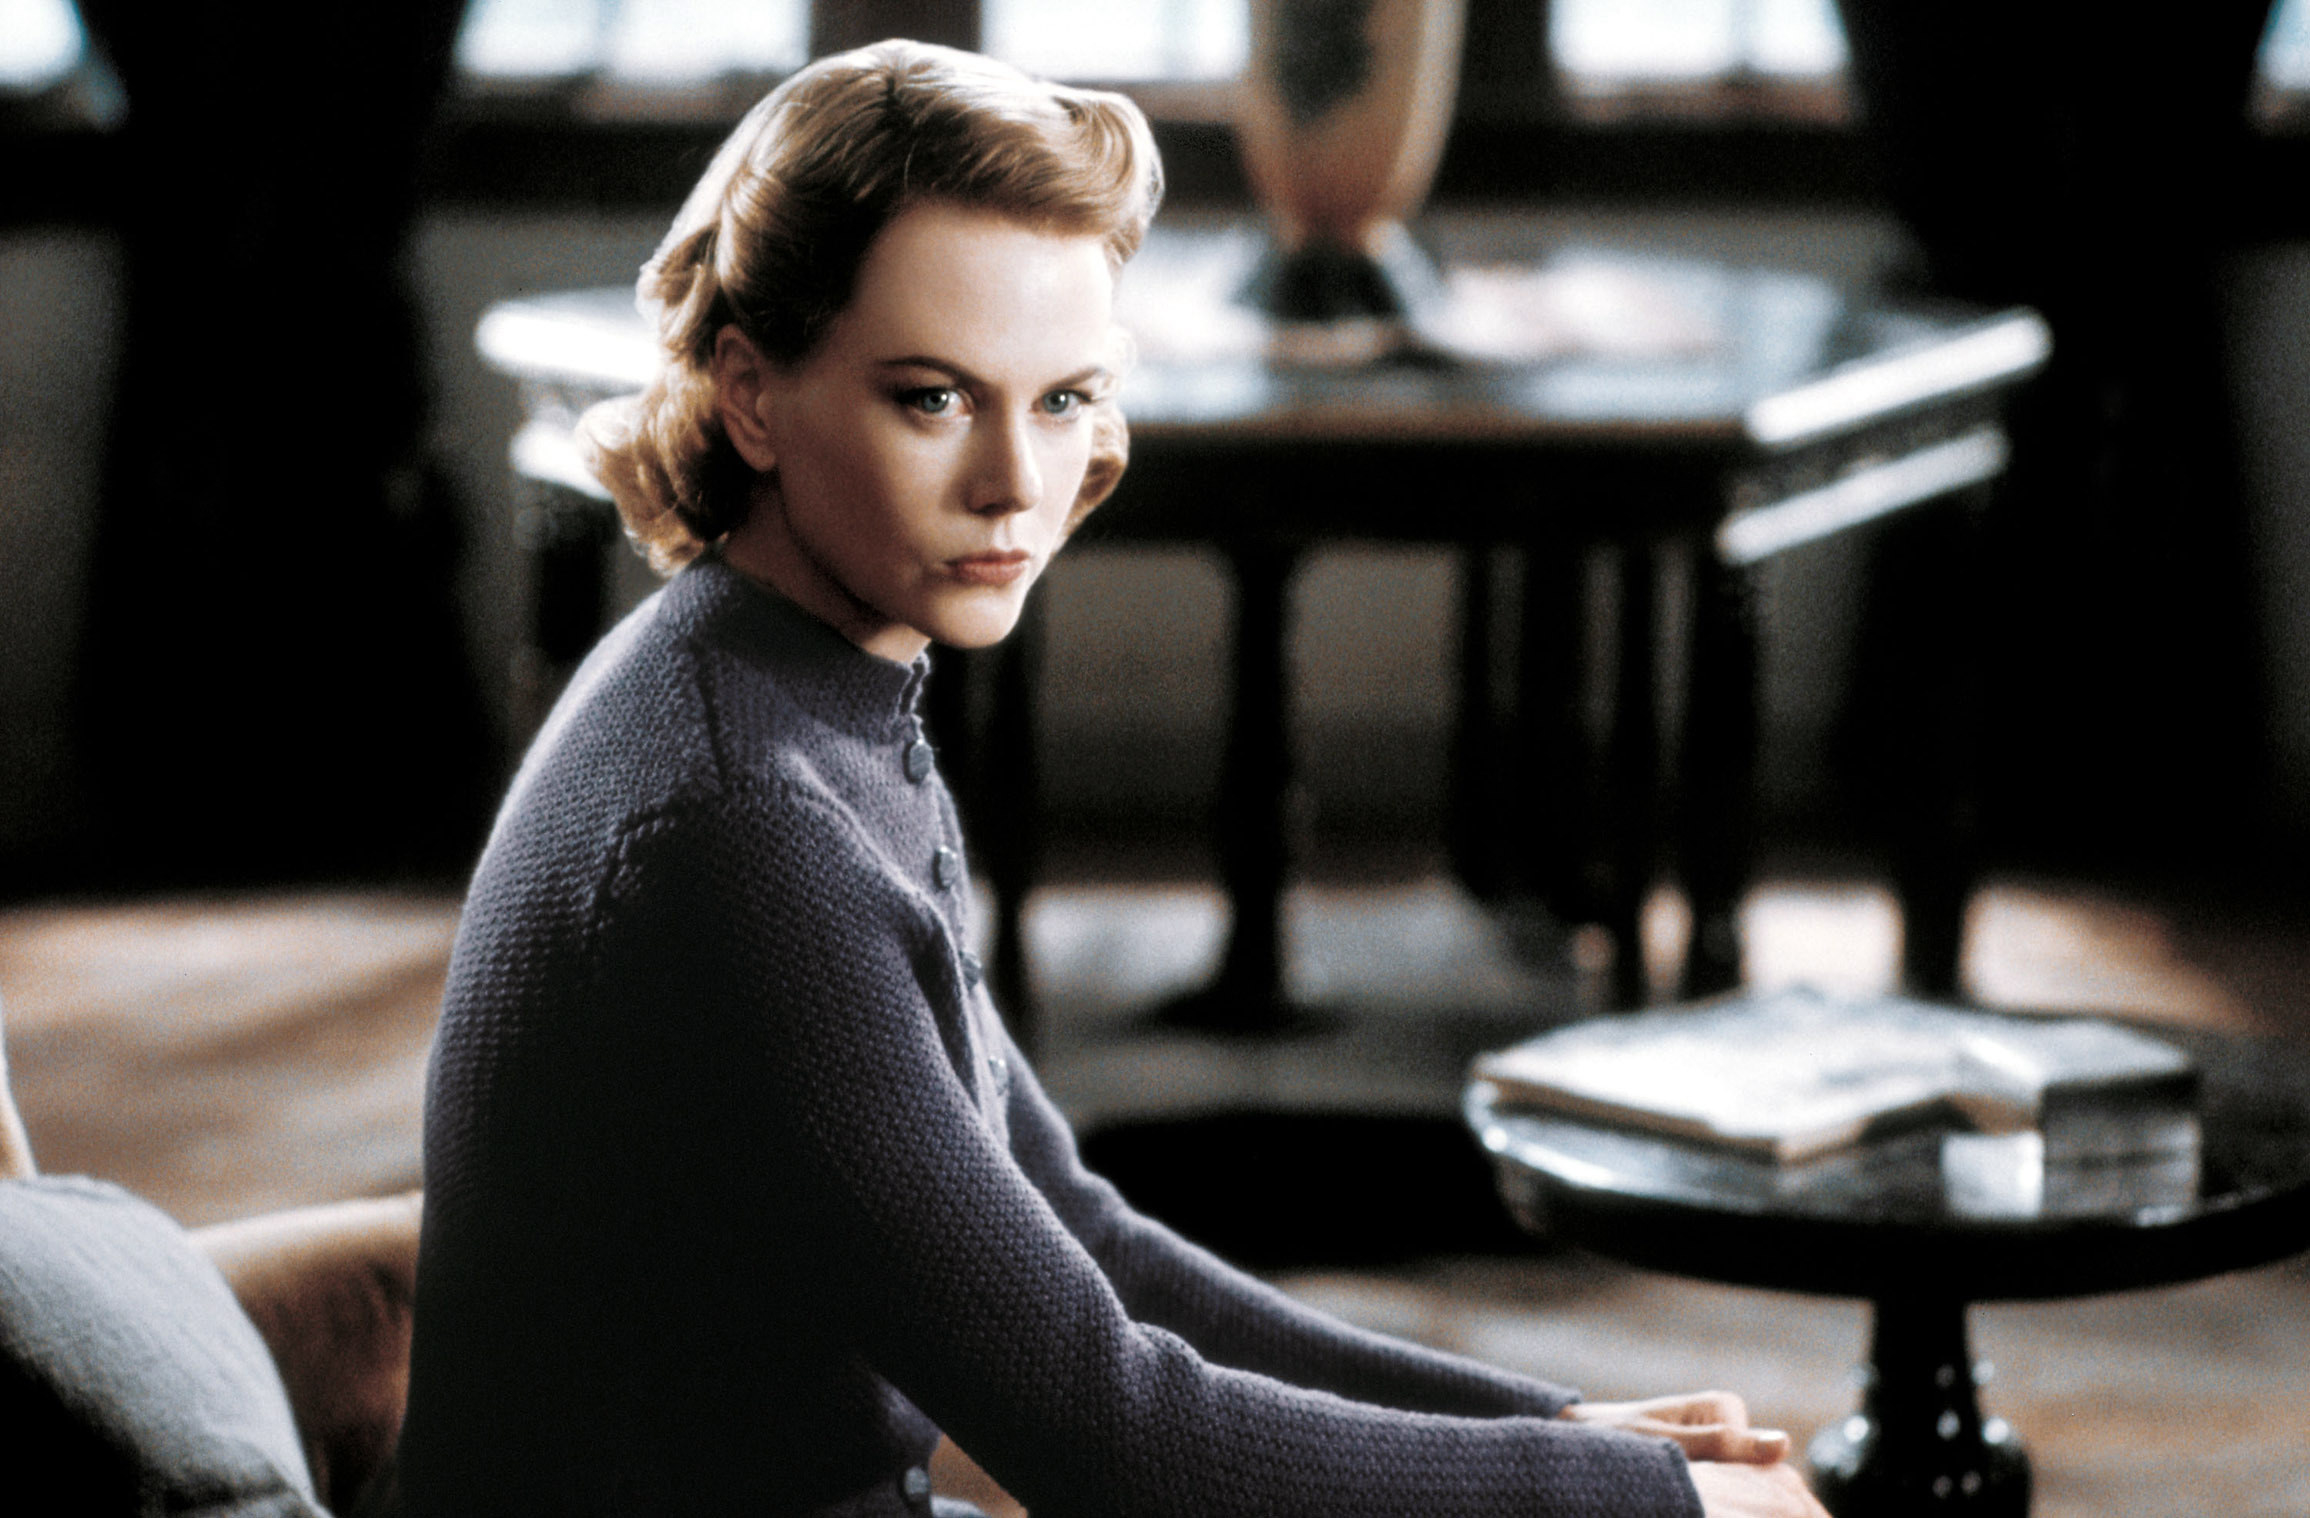 Nicole Kidman in the Others